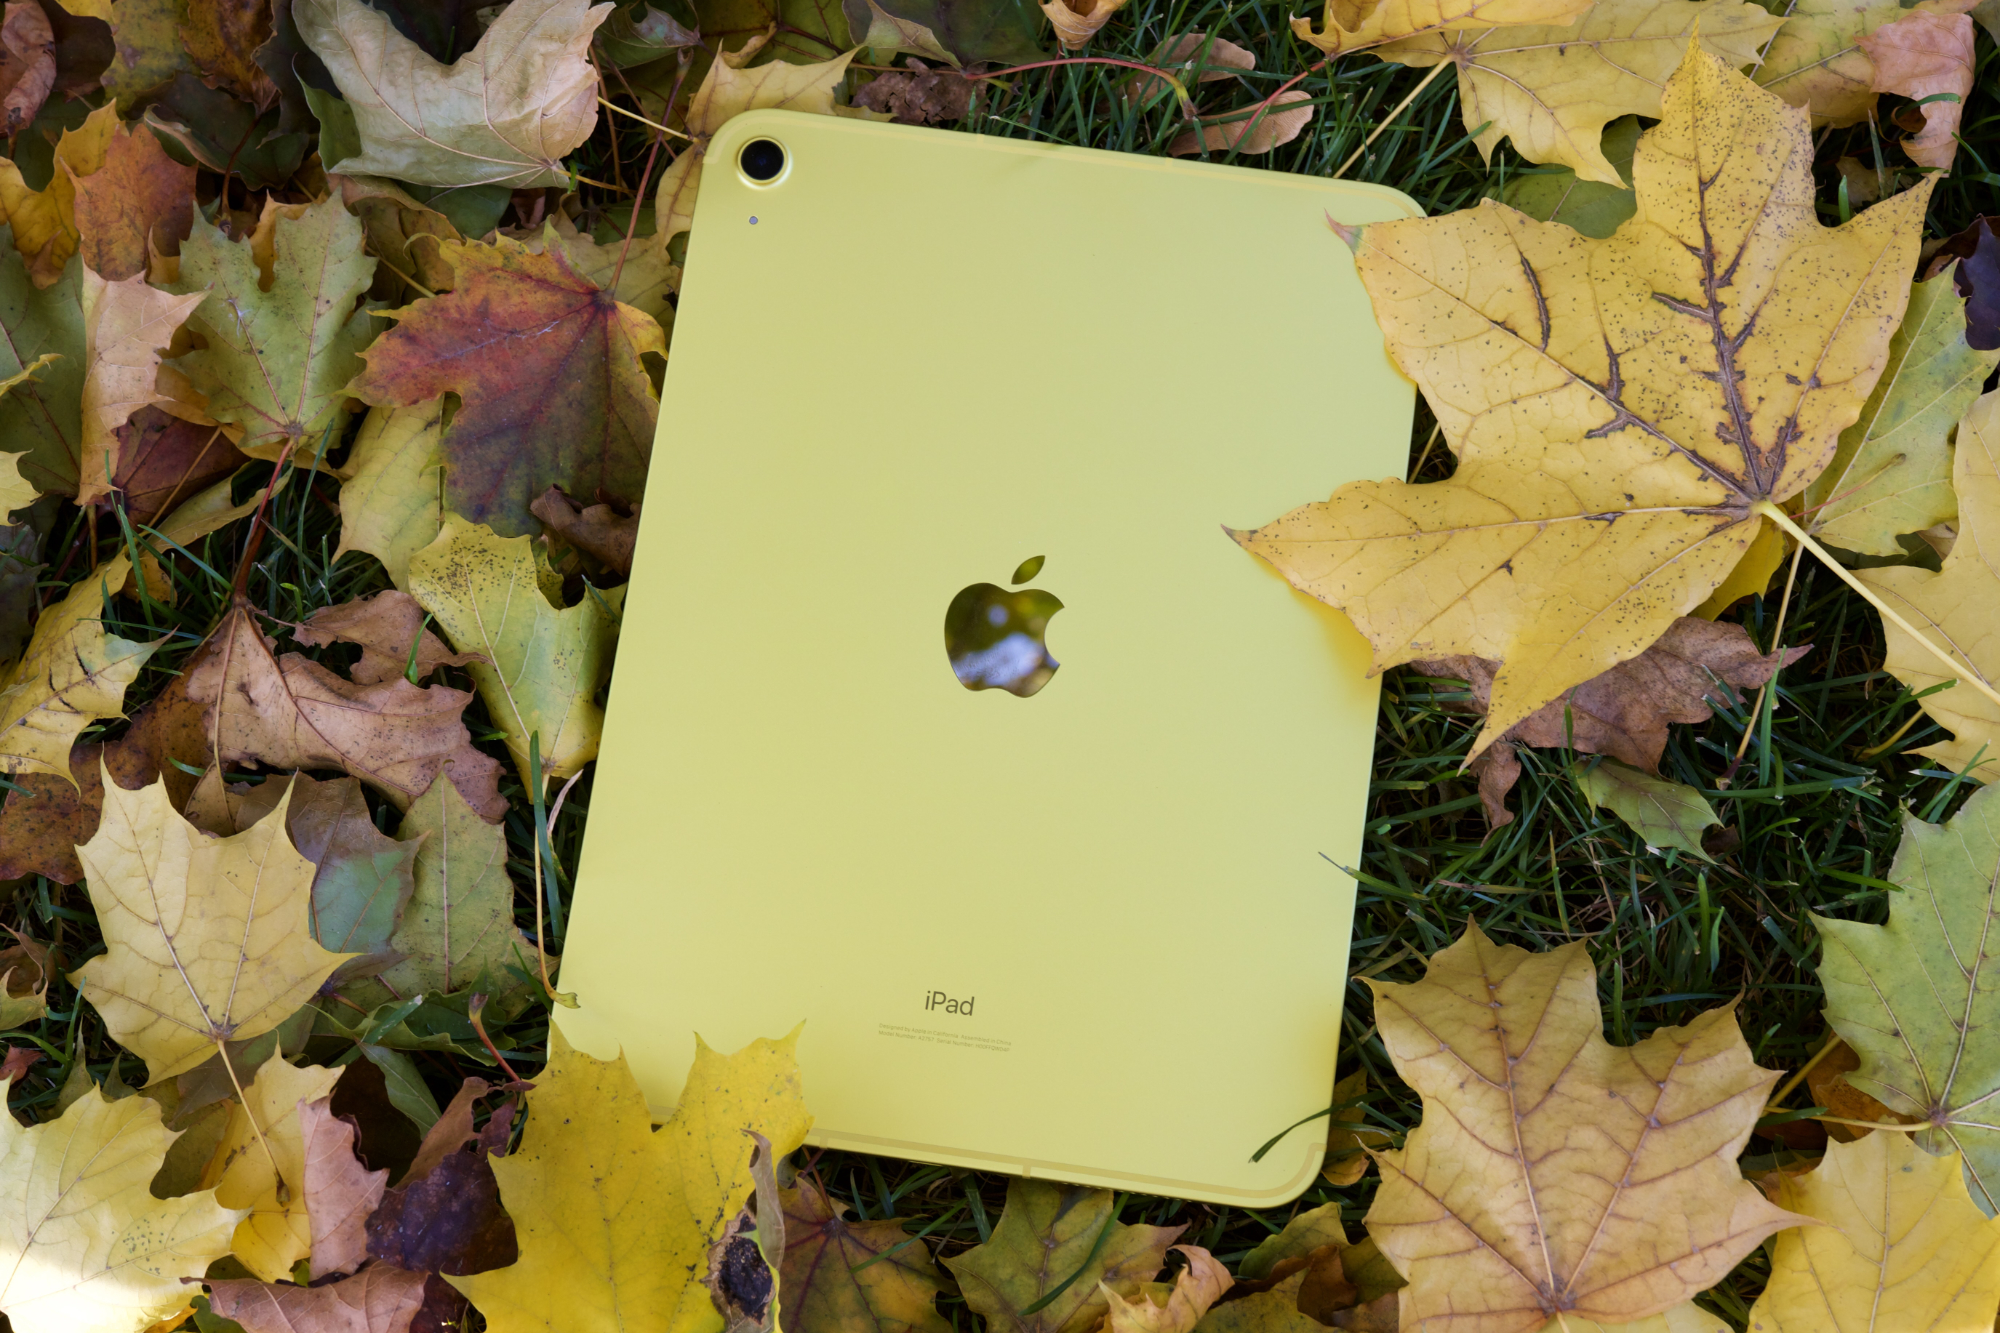 The iPad (2022) lying face-down on a pile of leaves.